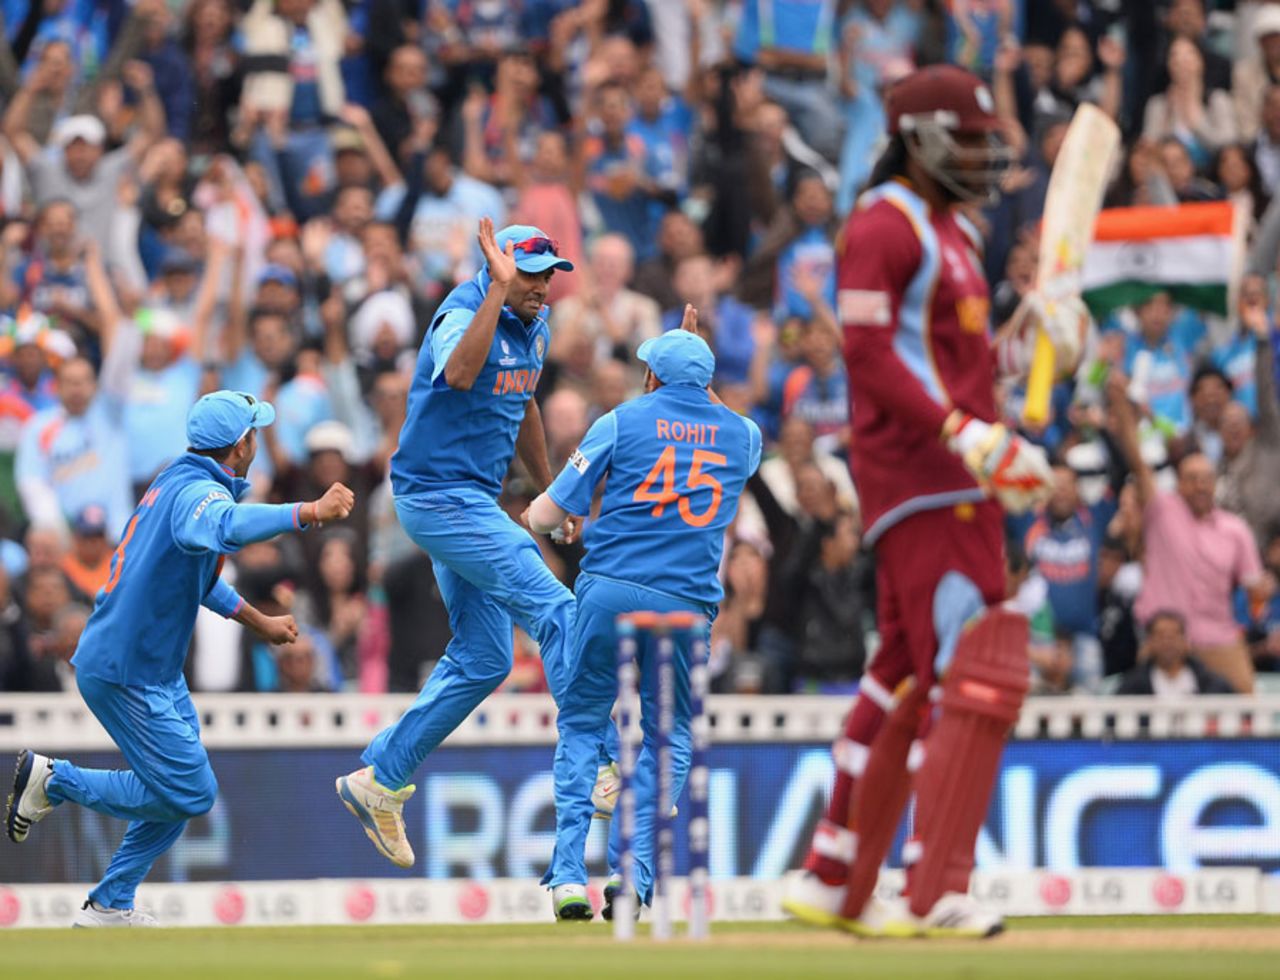 R Ashwin high-fives Rohit Sharma after completing a catch off Chris Gayle,  India v West Indies, Champions Trophy, Group B, The Oval, June 11, 2013